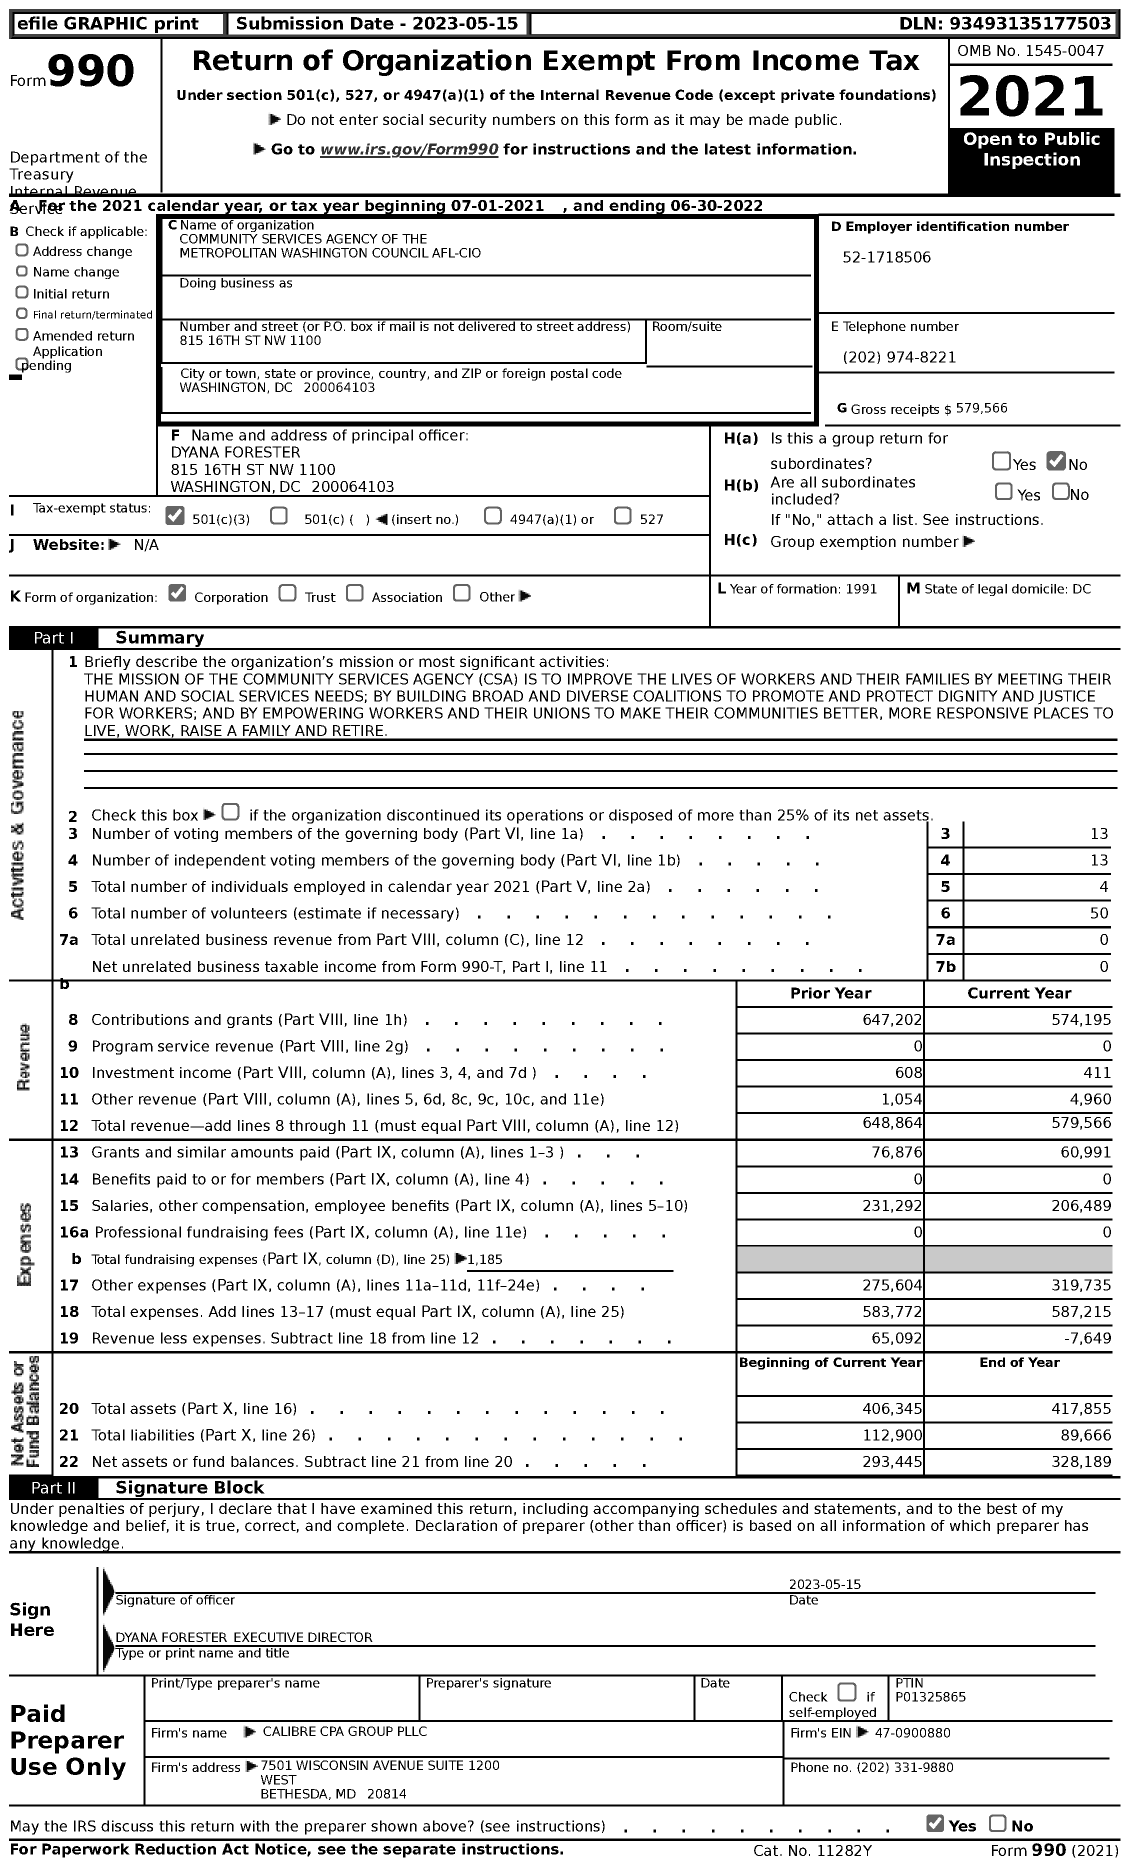 Image of first page of 2021 Form 990 for Community Services Agency of the Metropolitan Washington Council AFL-CIO